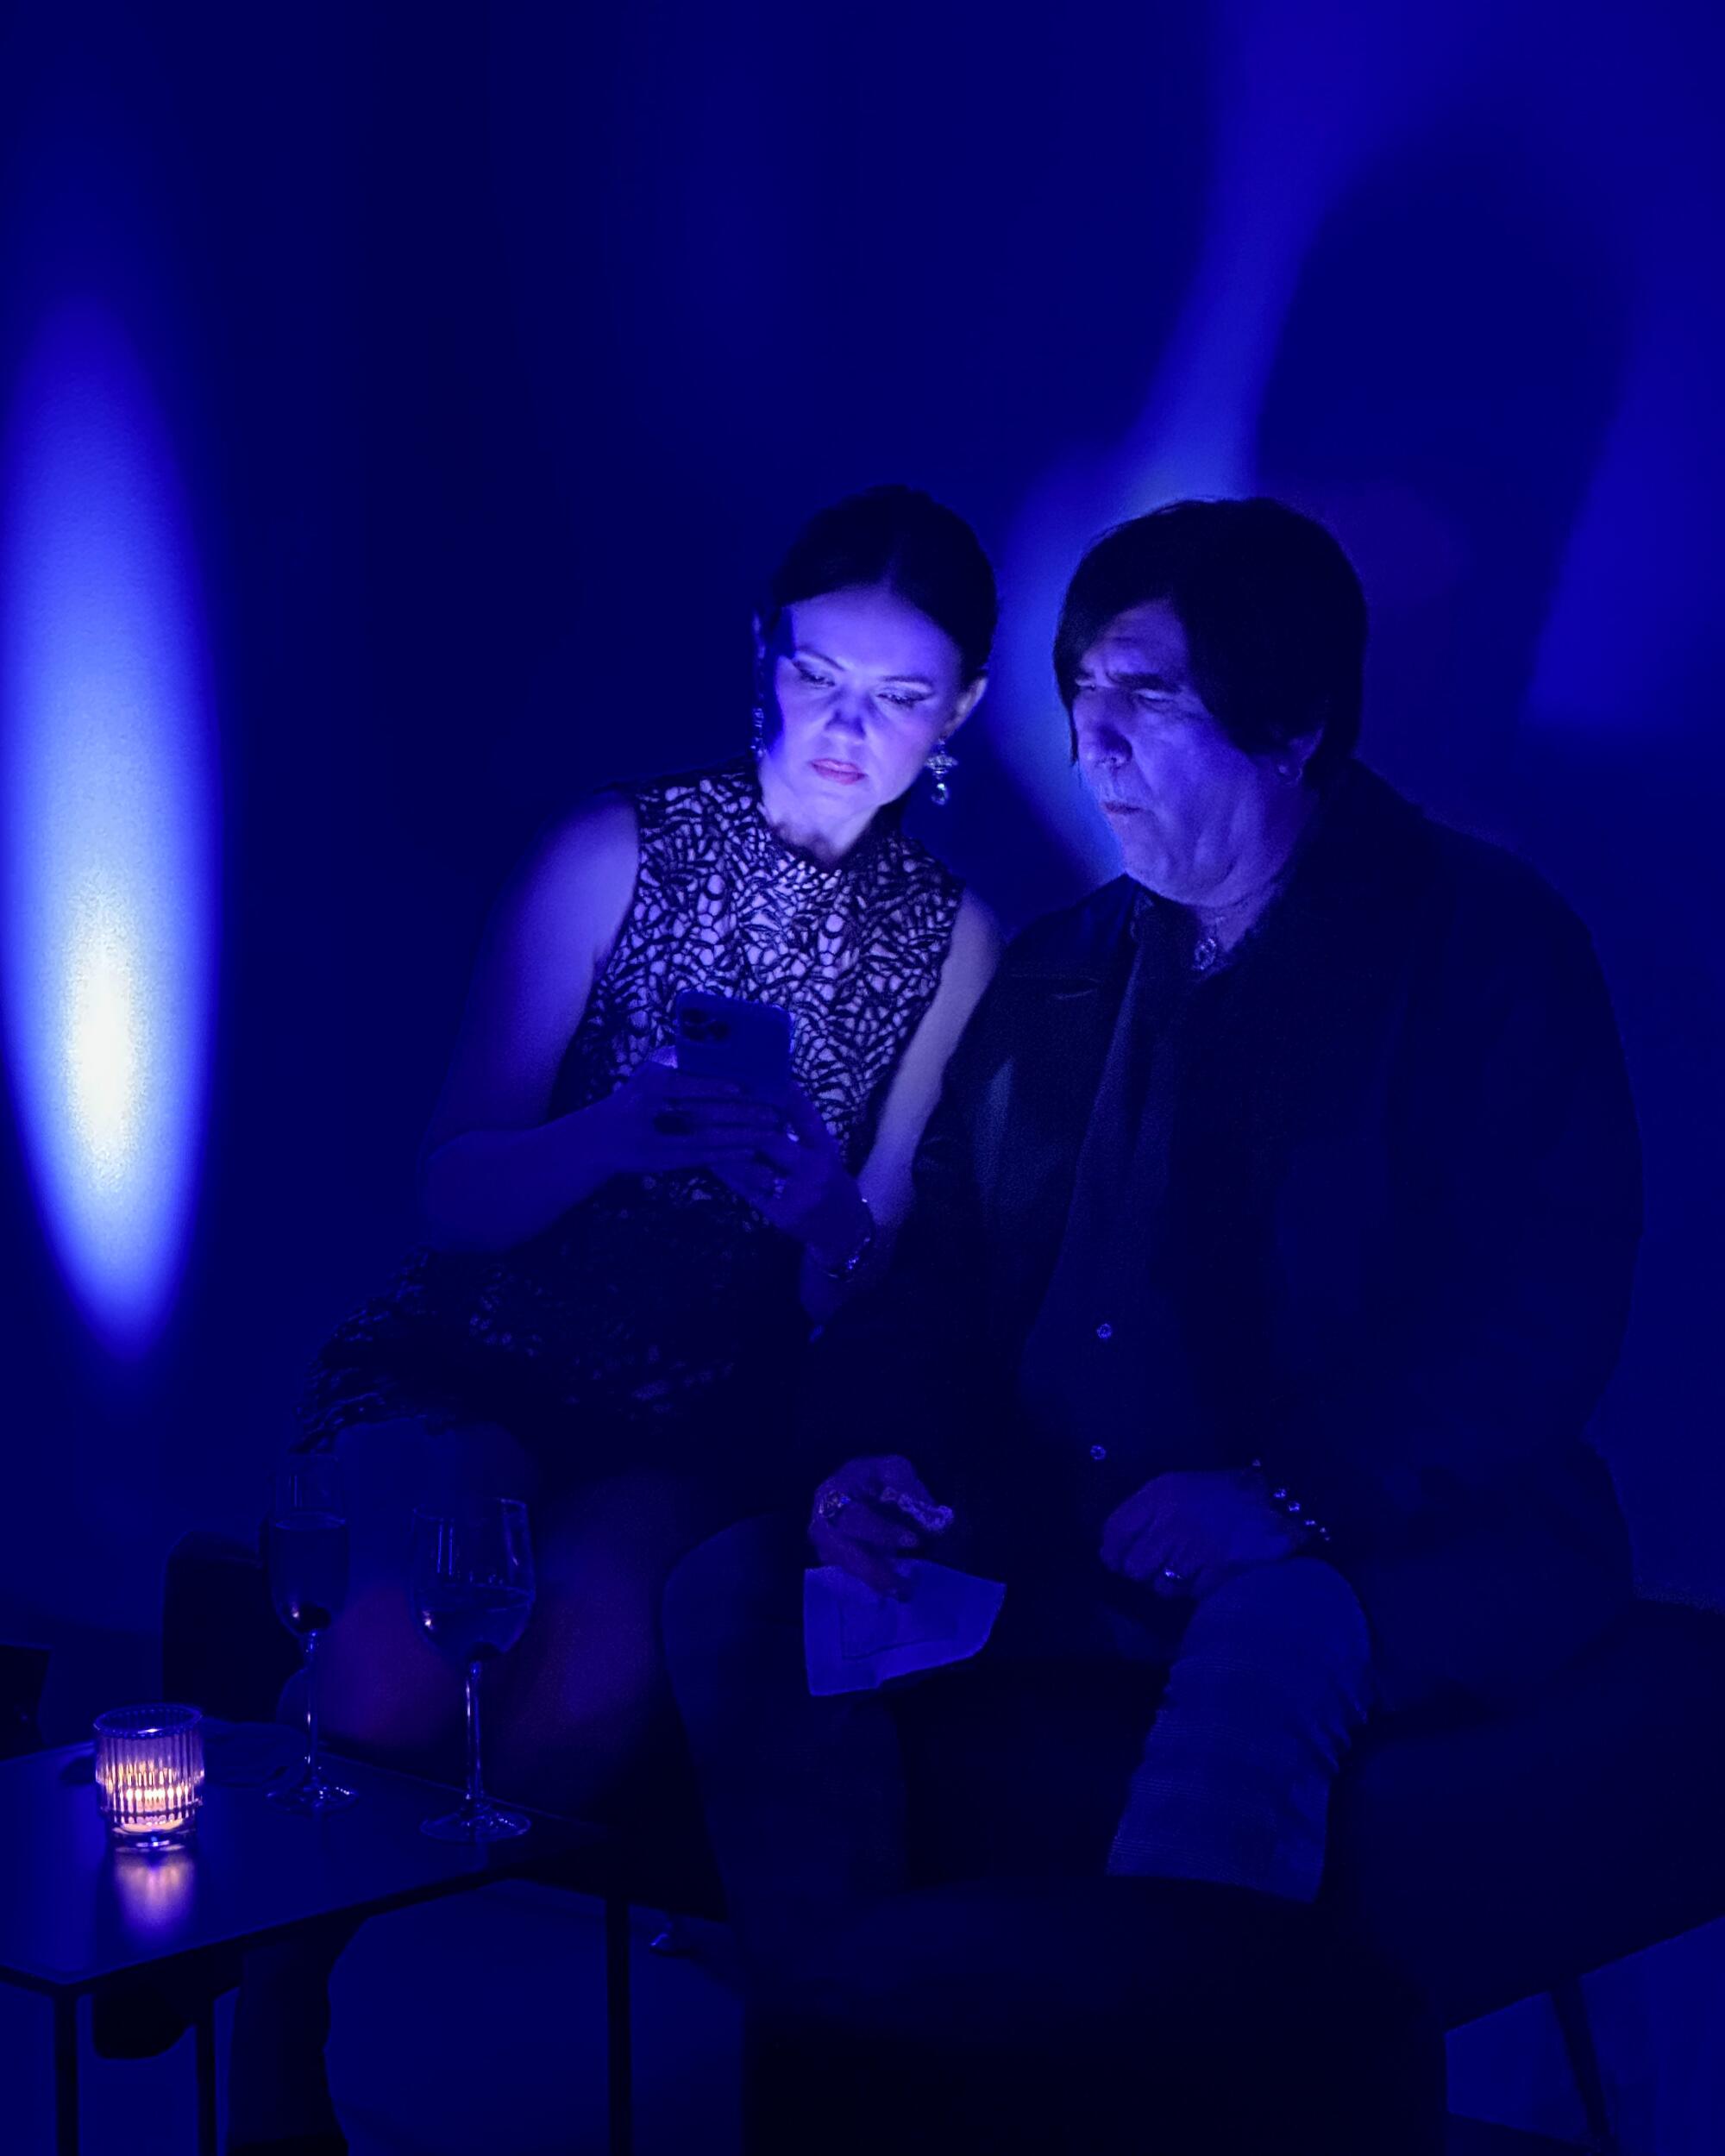 Two women looking at their phones bathed in blue light.